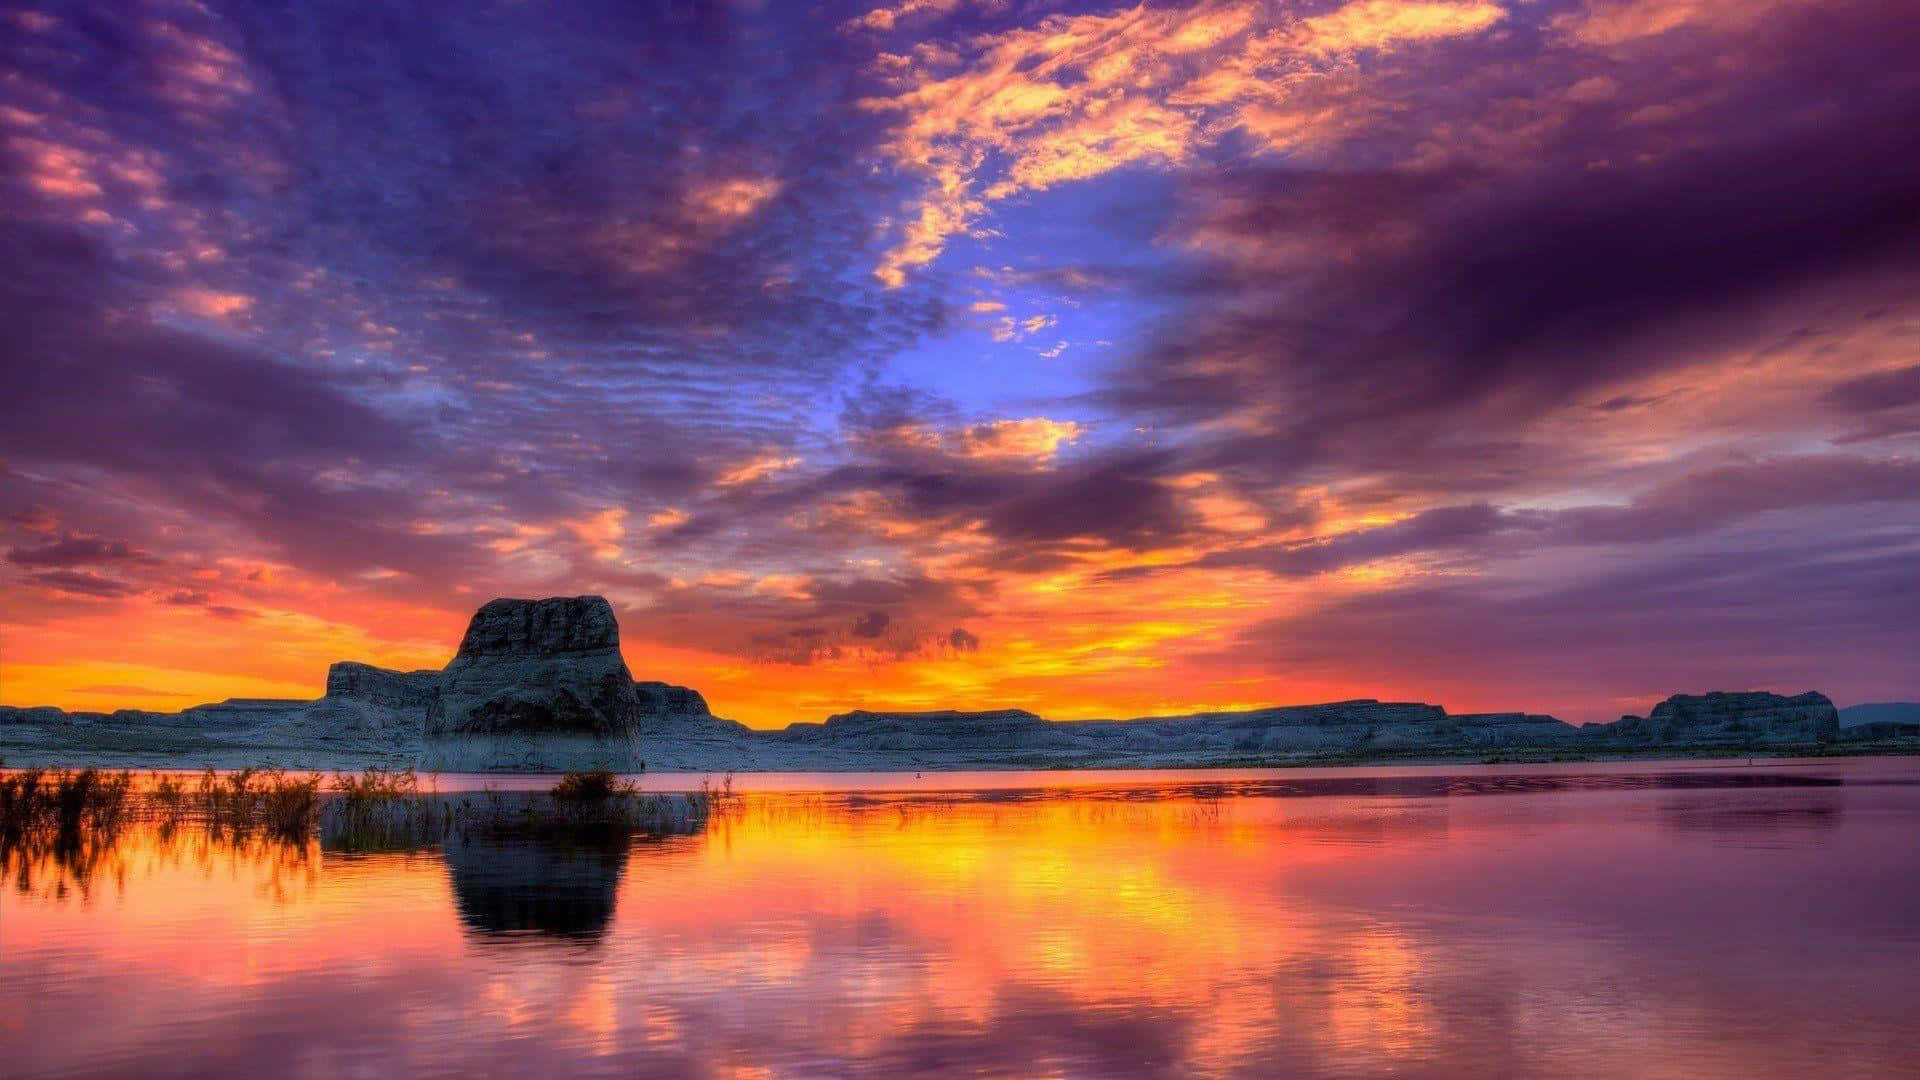 Sunset Reflections Over Water Wallpaper